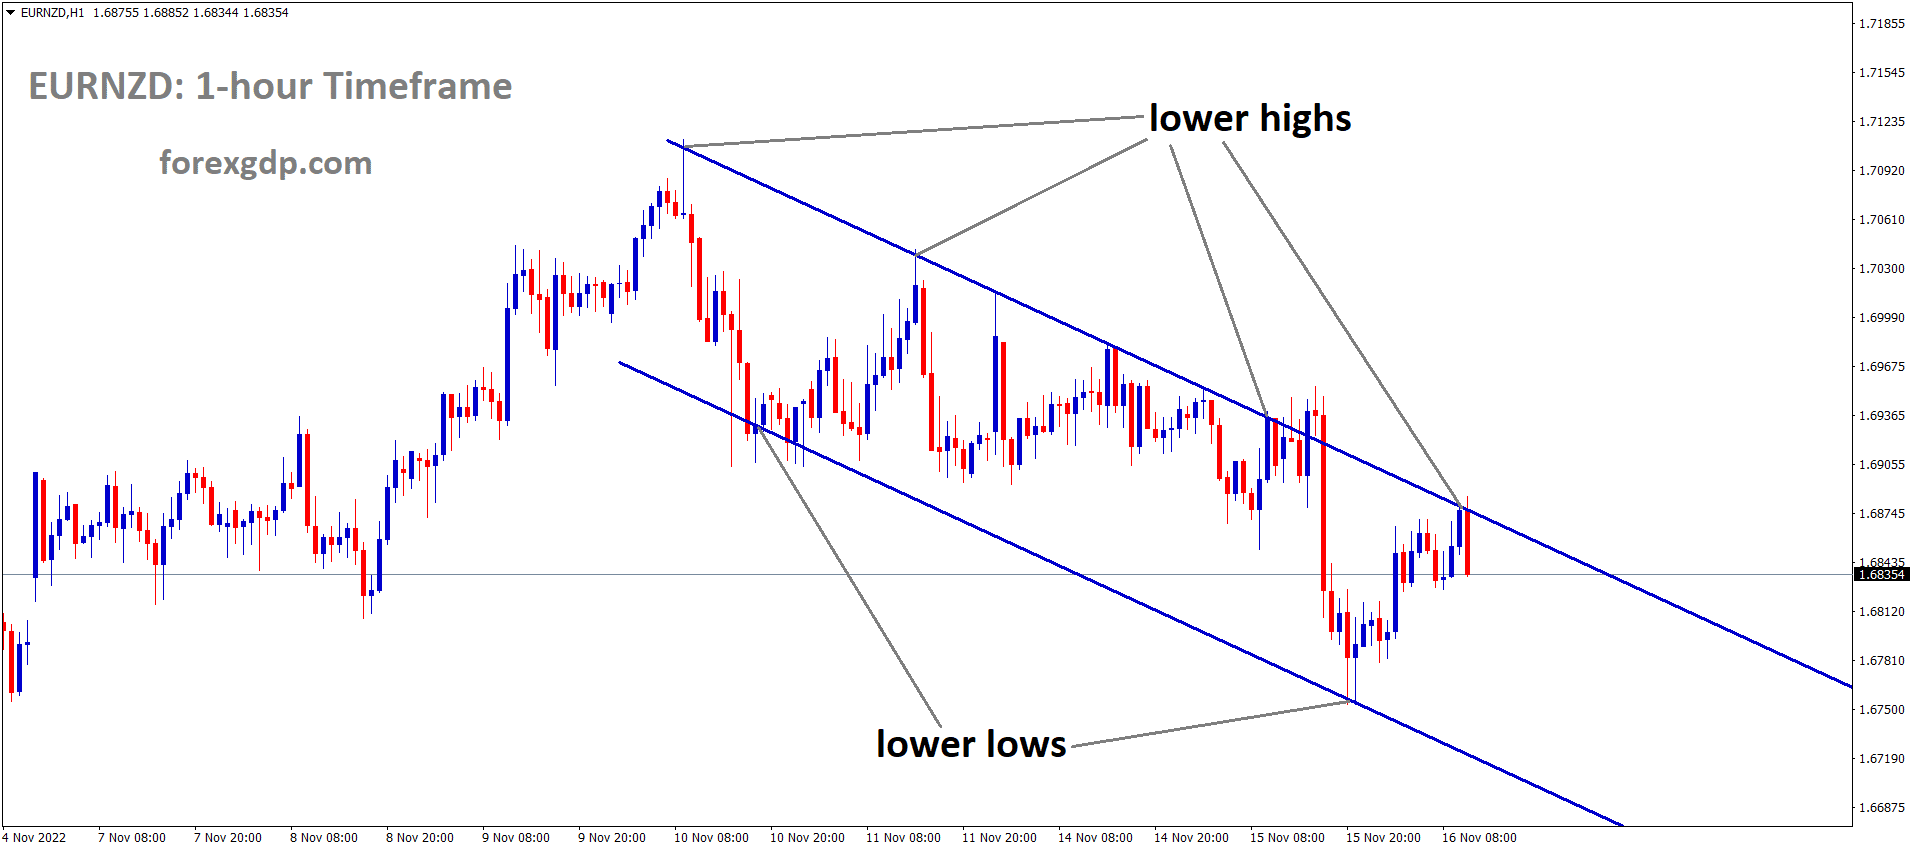 EURNZD is moving in the Descending channel and the market has fallen from the lower high area of the channel